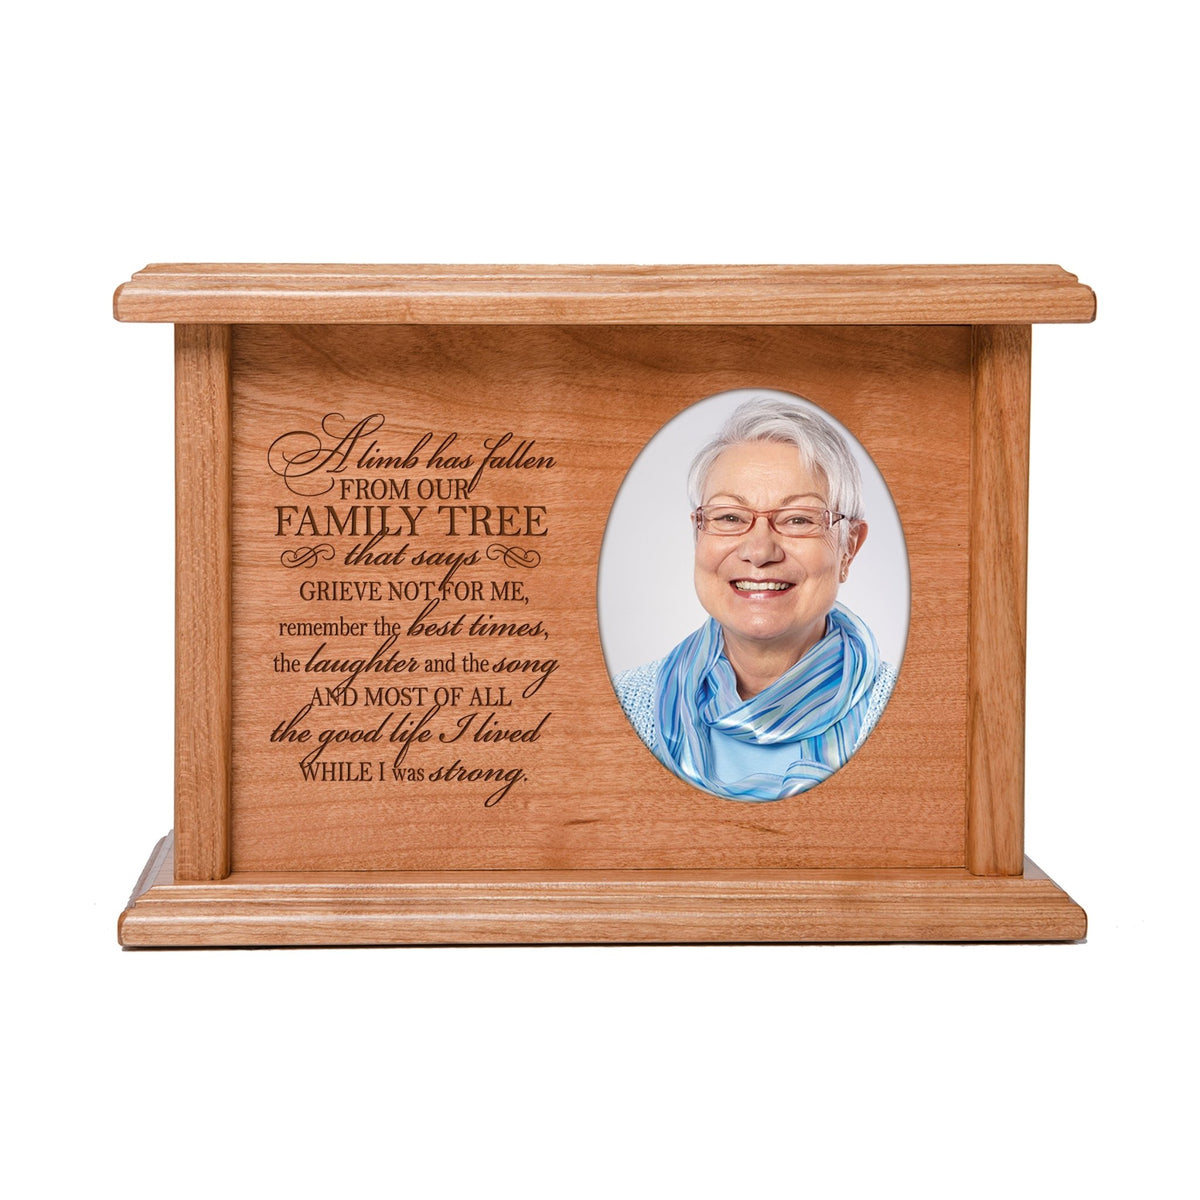 Memorial Cremation Urn Holds 2x3 photo 65 cu in A Limb Has Fallen - LifeSong Milestones